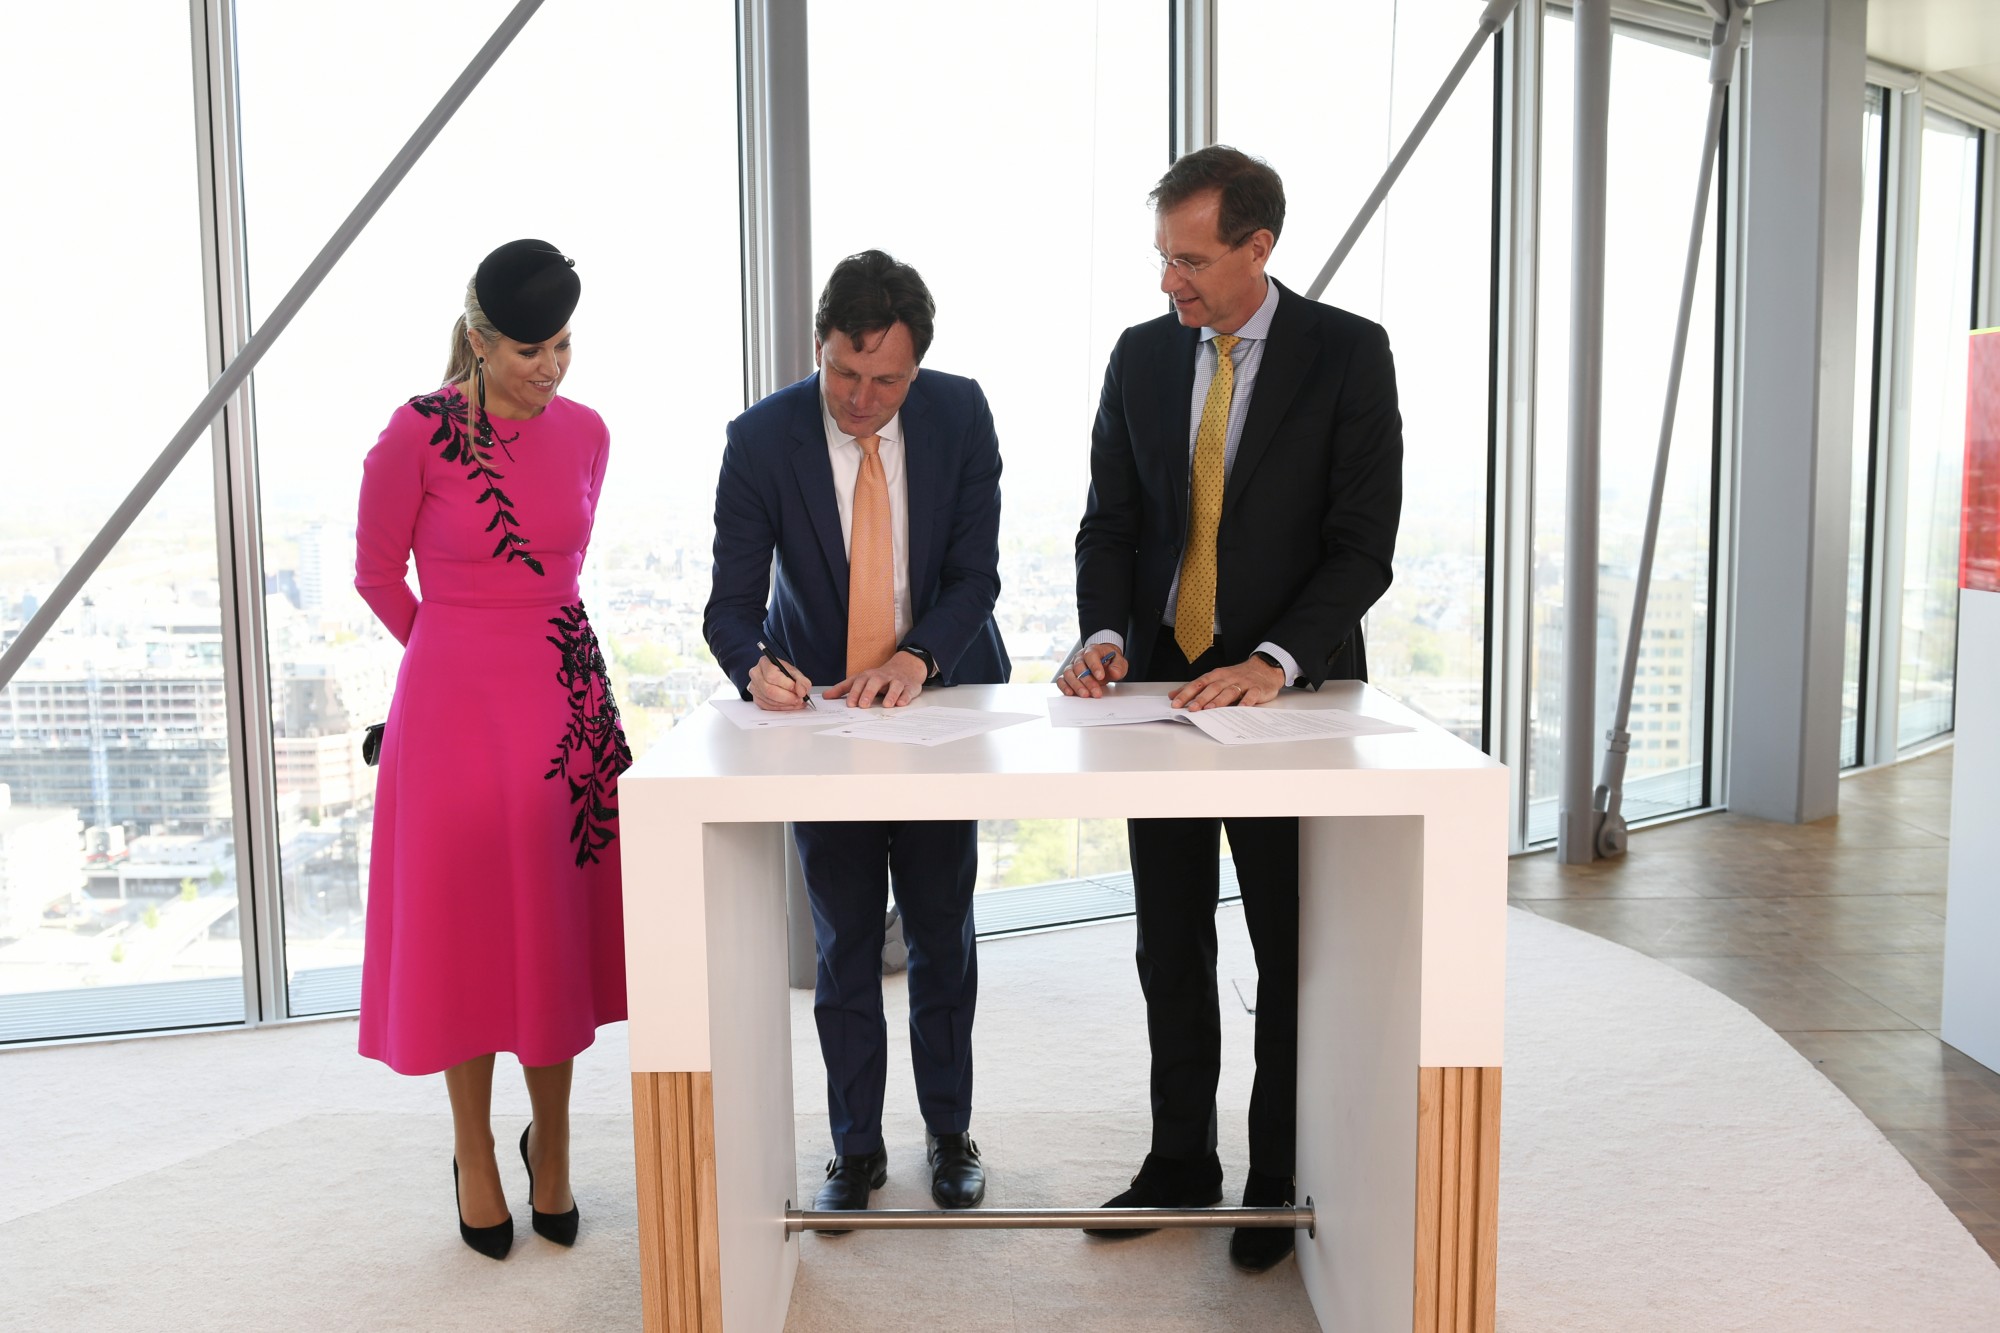 Her Majesty Queen Maxima of the Netherlands, in her capacity as UN Secretary-General’s Special Advocate for Inclusive Finance for Development (left) witnessed Arjan Bol, Country Manager of Mastercard Netherlands (middle), and Wiebe Draijer, CEO of Rabobank (right), signing a strategic partnership to increase financial inclusion across the agriculture value chain in emerging markets in April this year during the CEOP advisors meeting at Rabobank in Utrecht